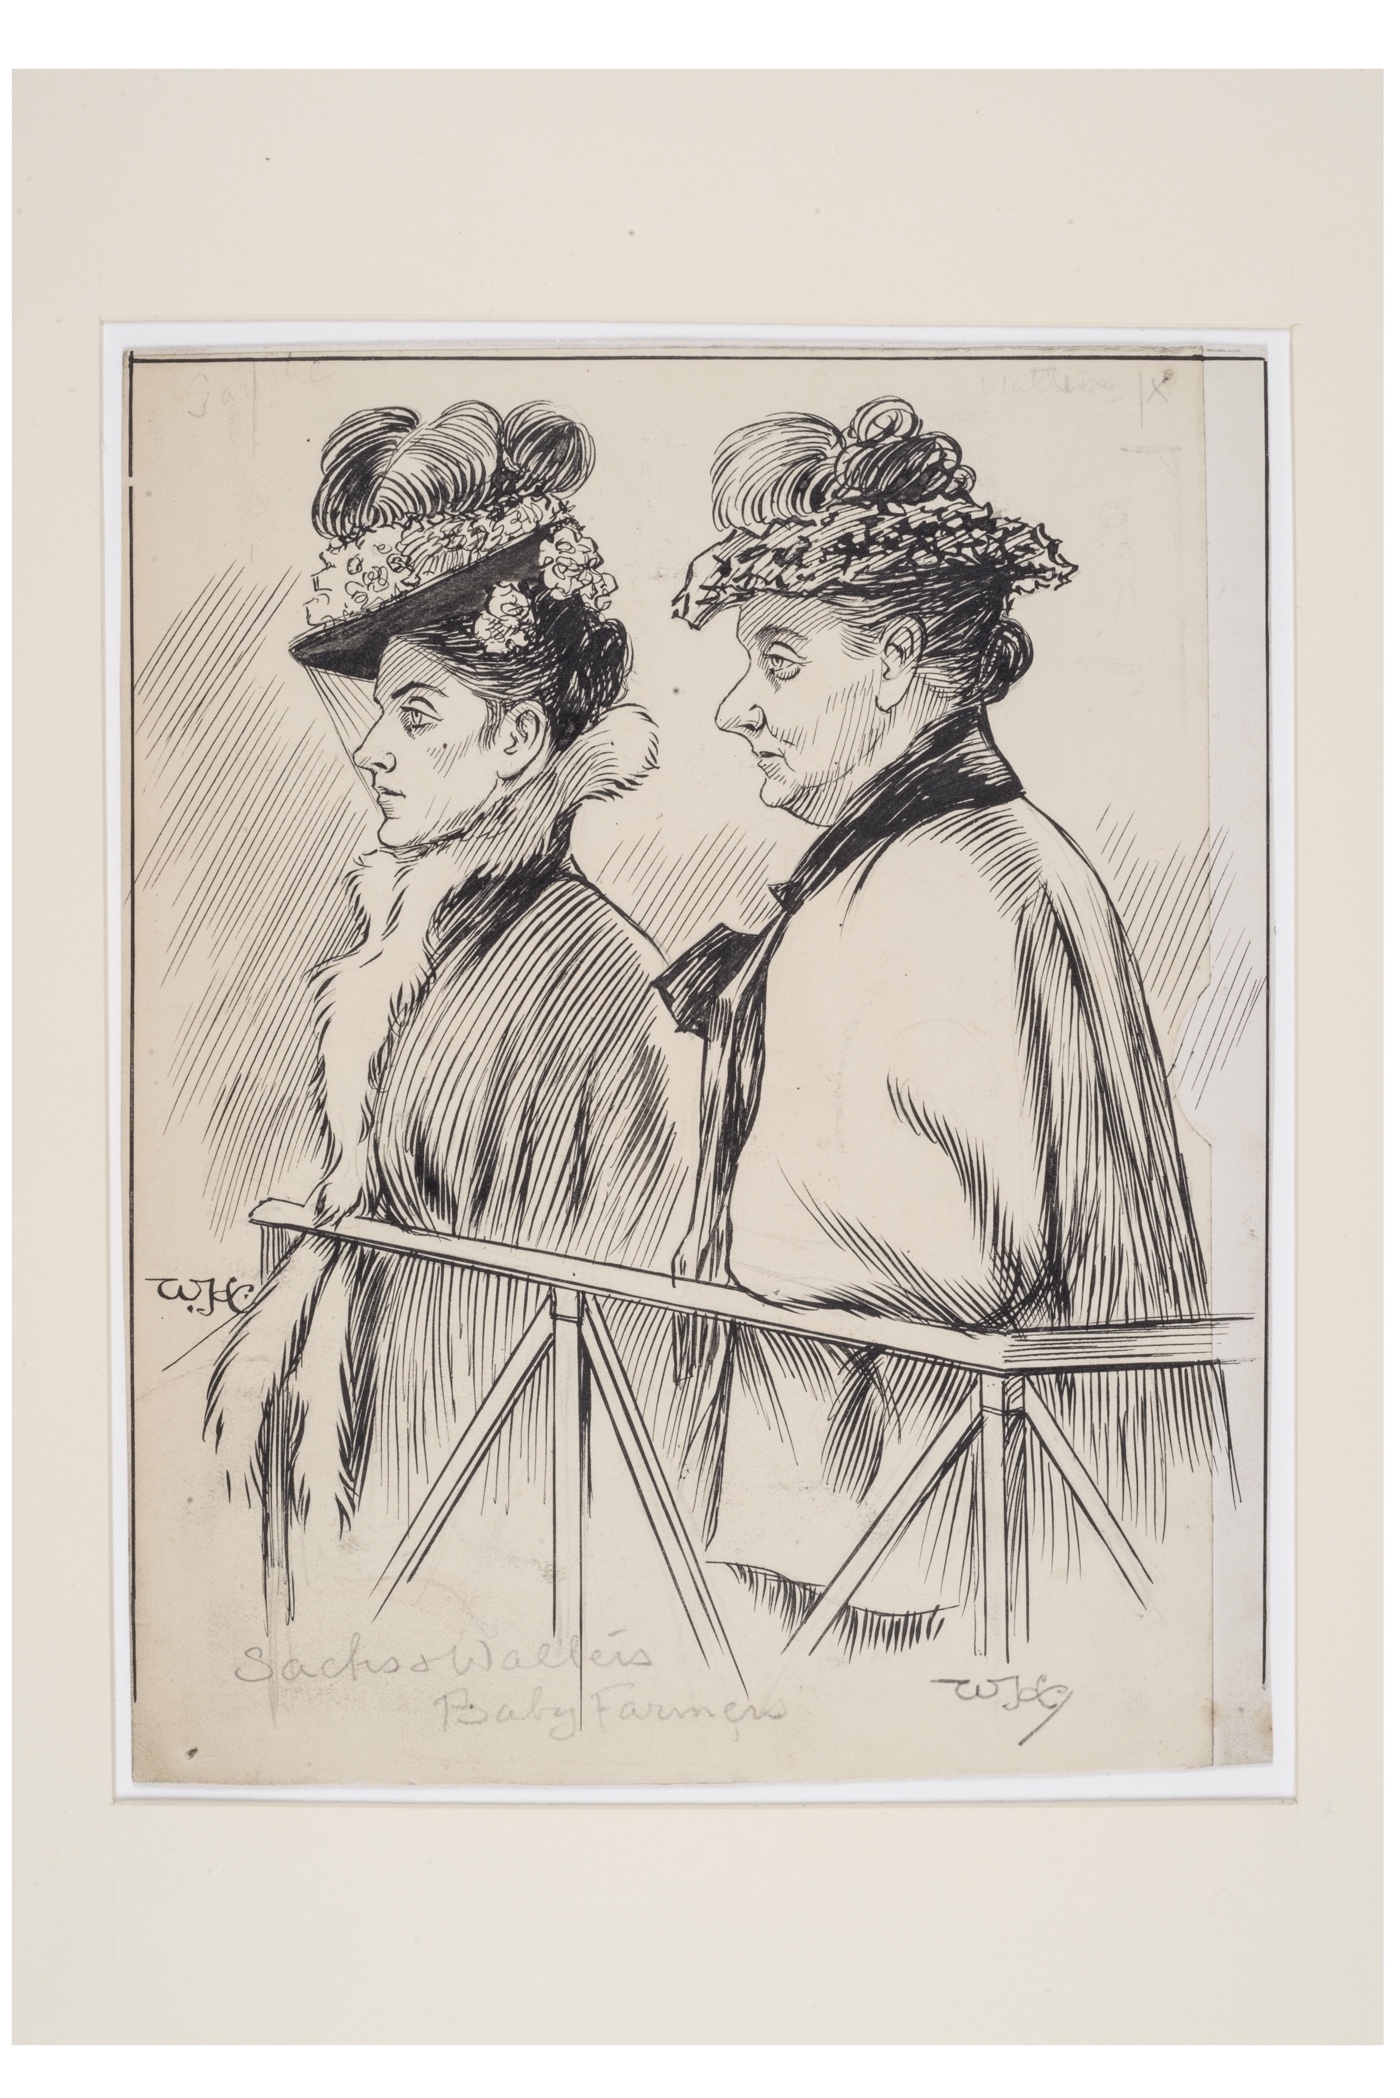 1a3. William Hartley Courtroom illustration of Amelia Sachs and Annie Walters on trial for baby farming, 1903 ∏ Museum of London